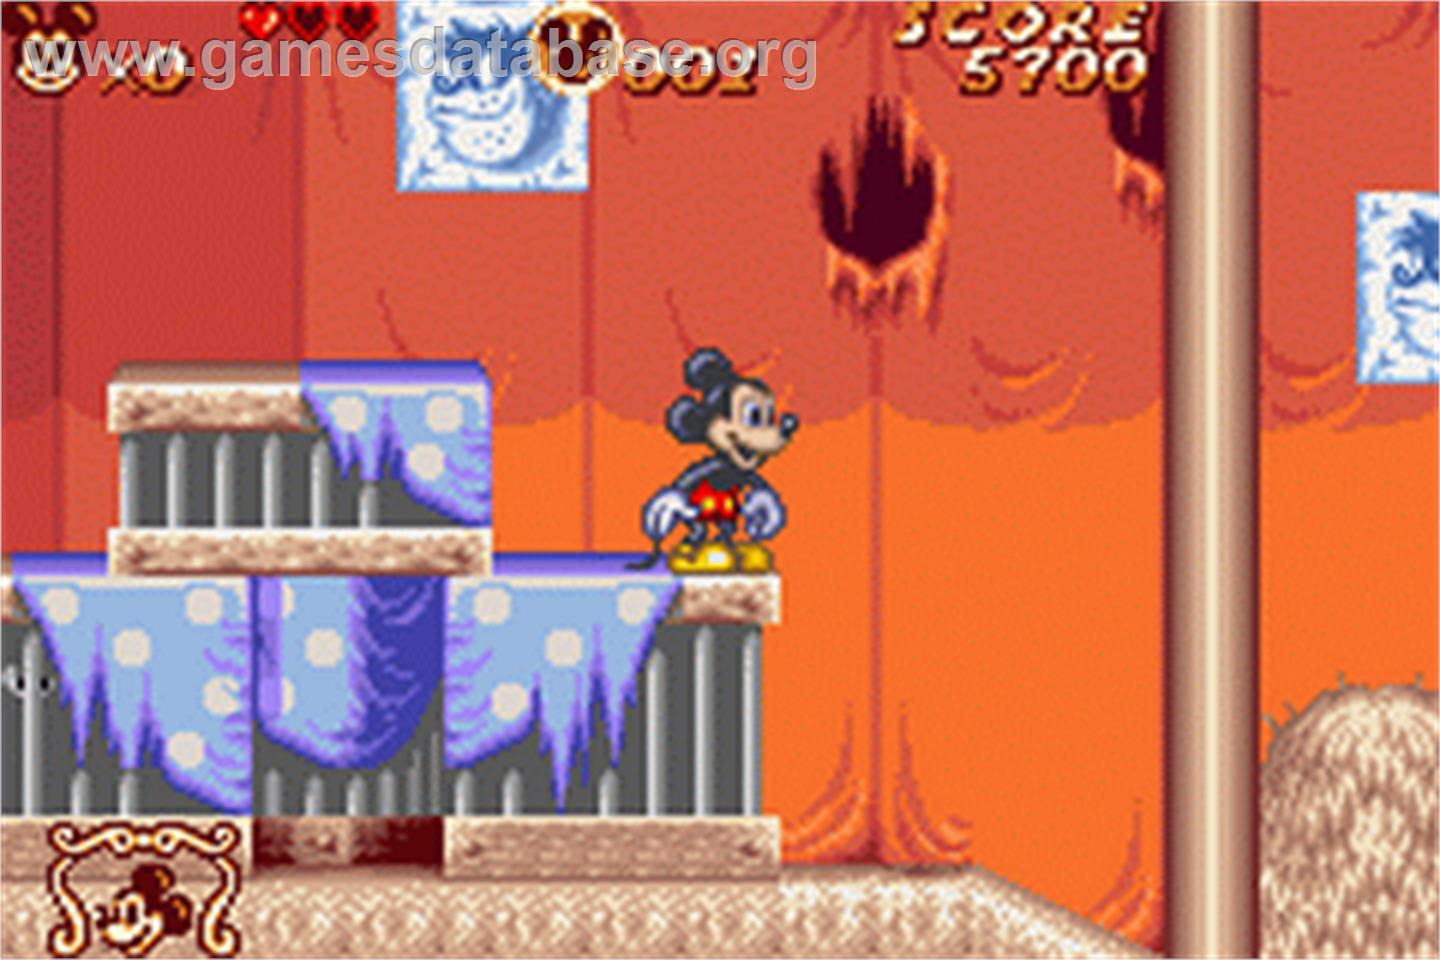 Great Circus Mystery starring Mickey and Minnie Mouse - Nintendo Game Boy Advance - Artwork - In Game